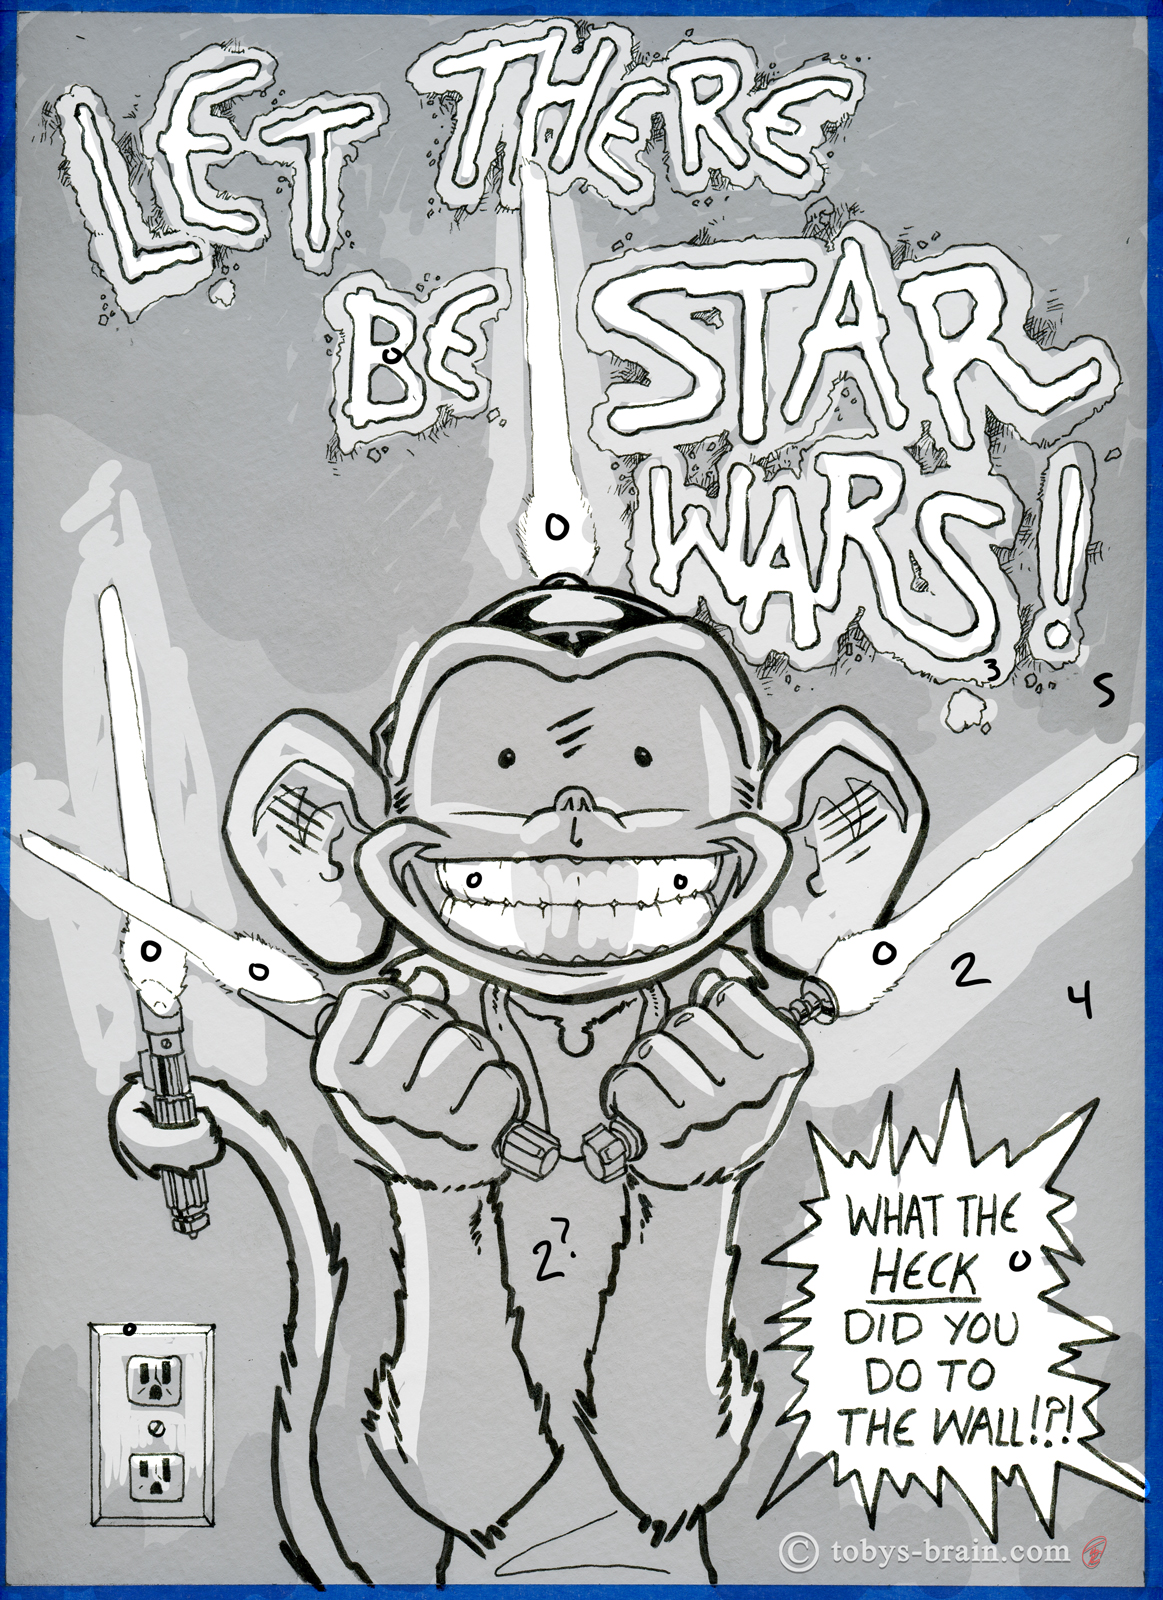 toby-gray-pmd-let-there-be-star-wars-digital-tone-test